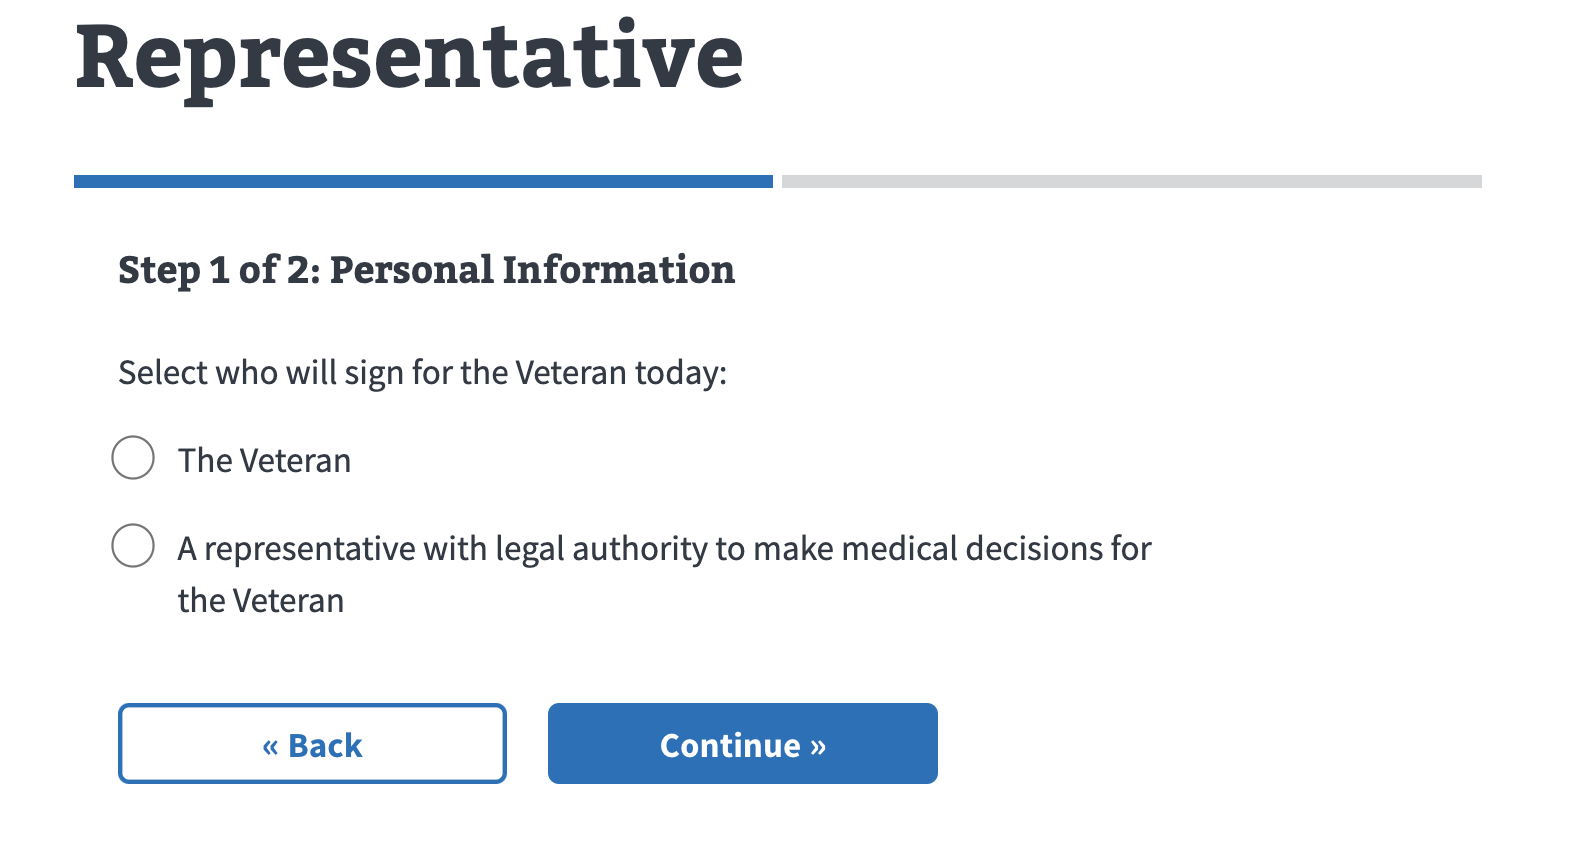 Screen shot showing a radio selection with two options for the question, Select who will sign for the Veteran today. Answers include The Veteran and A representative with legal authority to make medical decisions for the Veteran